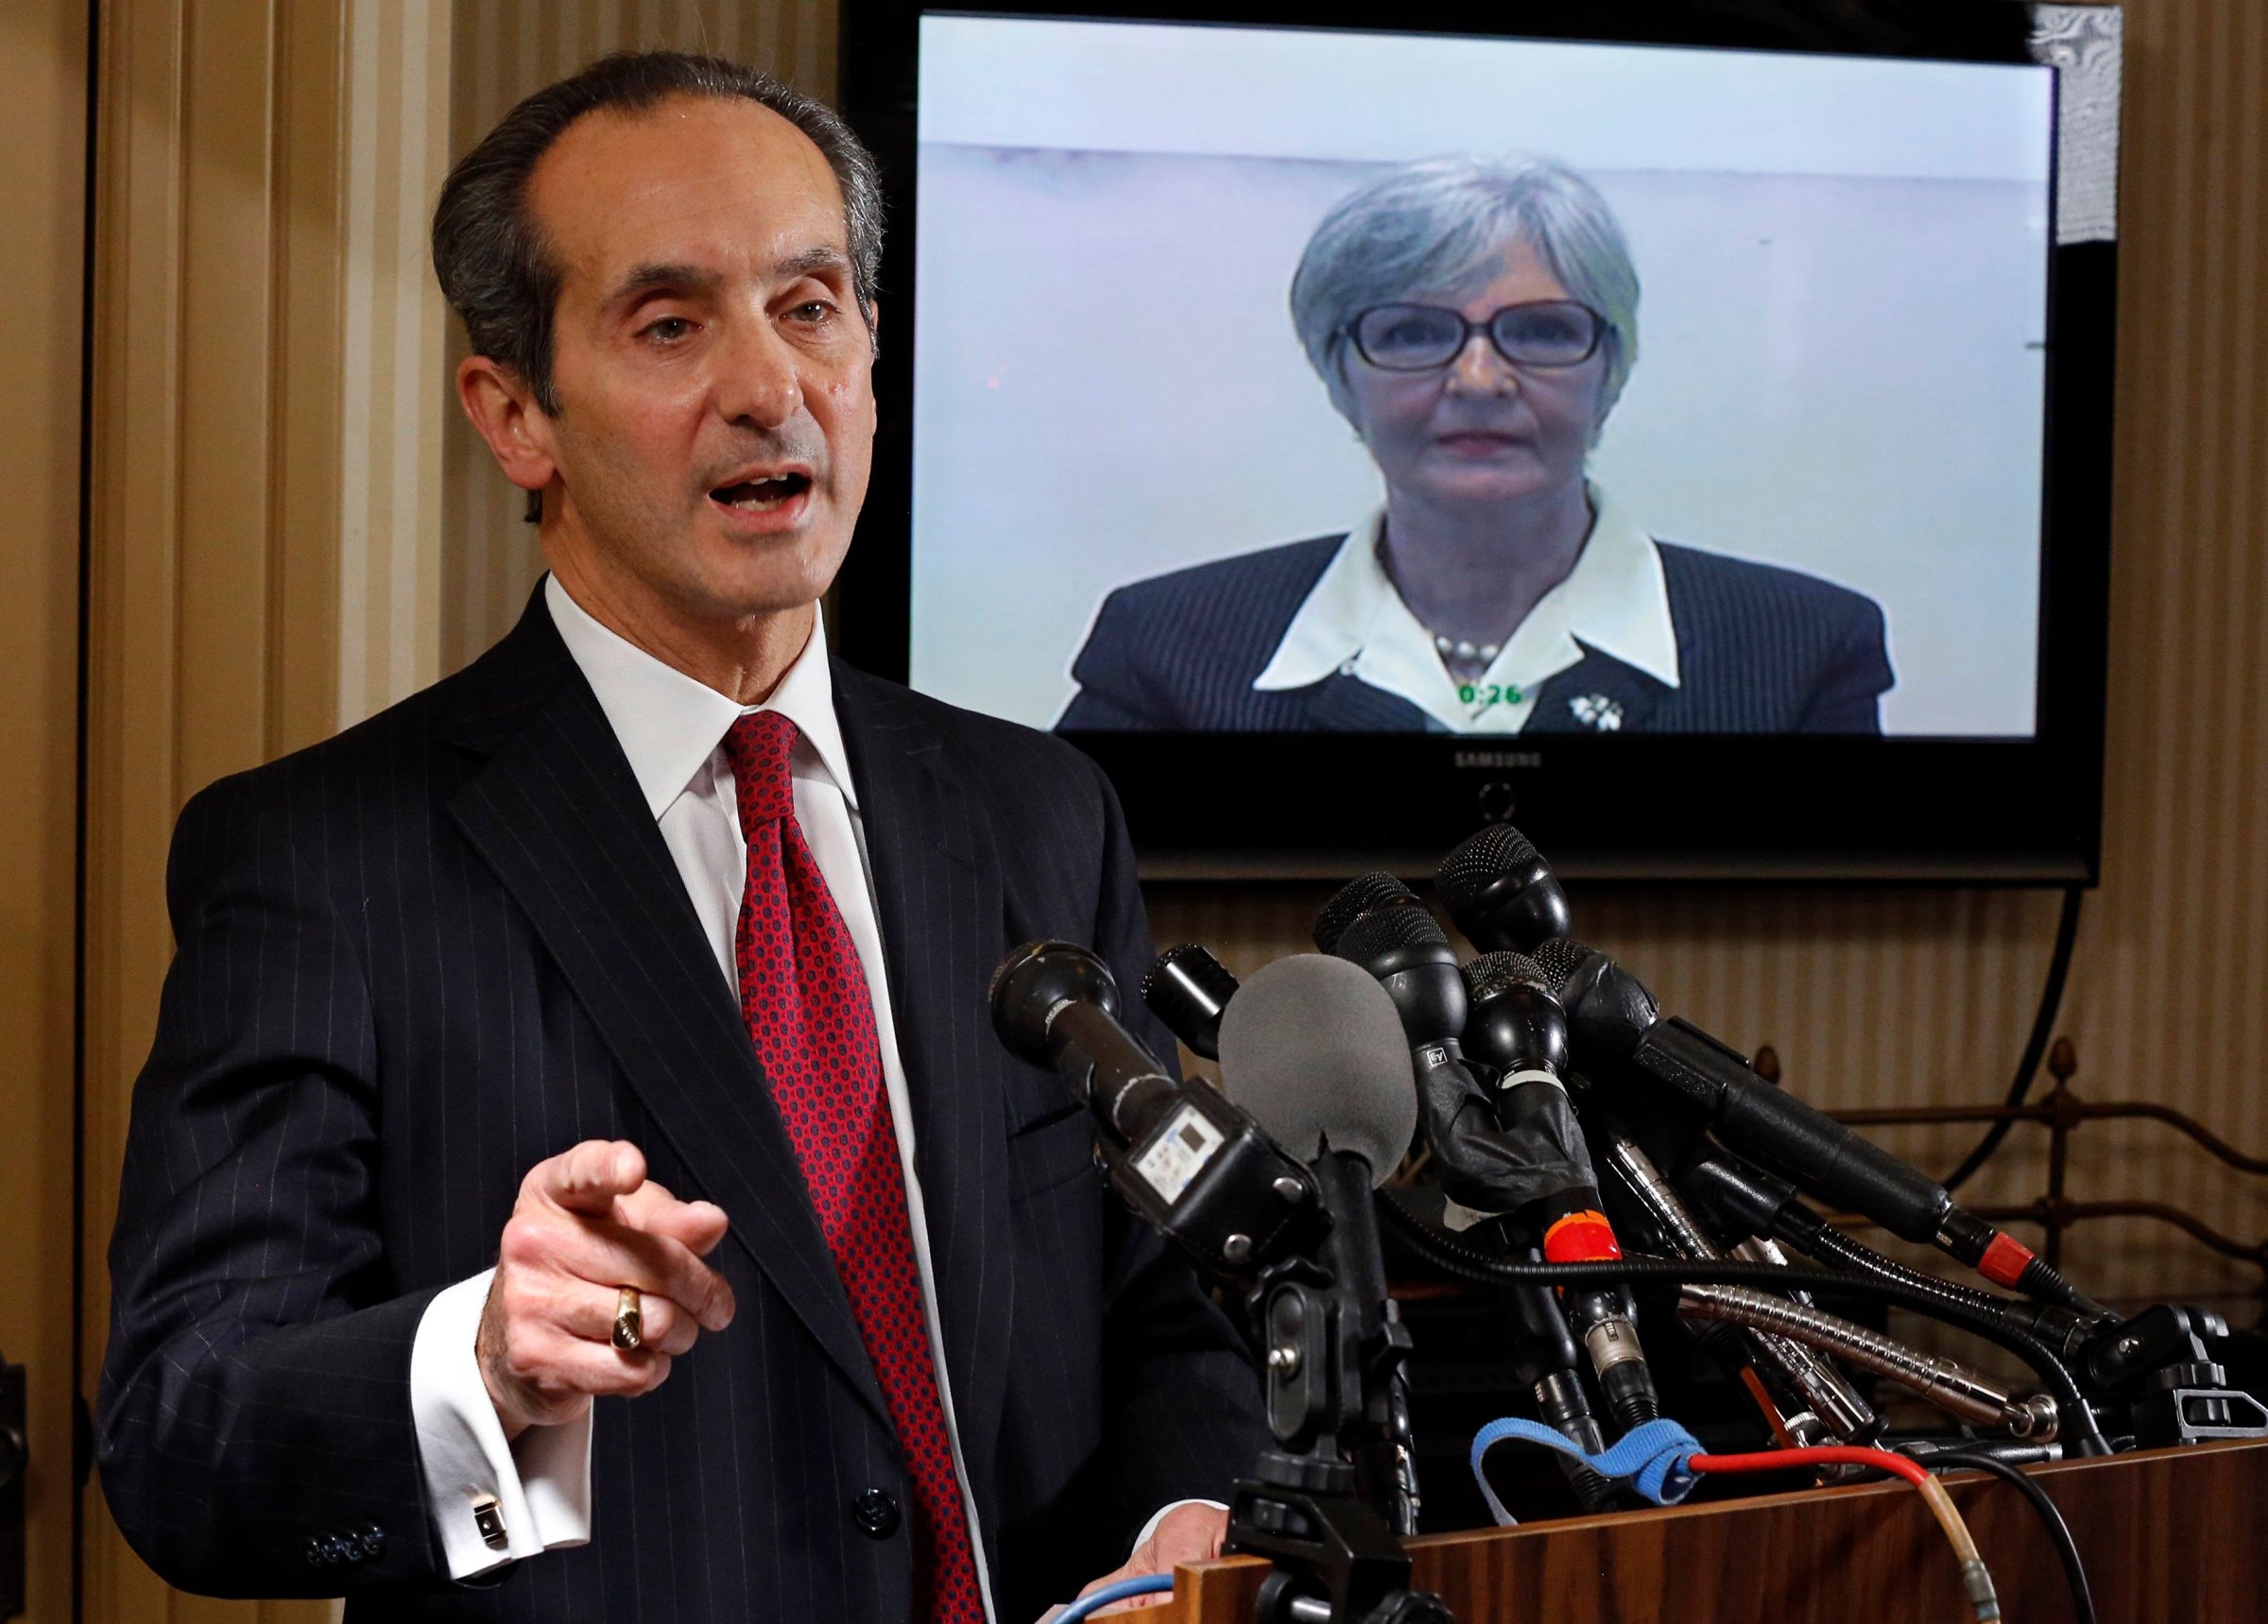 Tamara Green, the plaintiff in a defamation lawsuit claiming that she was "sexually assaulted by comedian Bill Cosby in the 1970s" watches by video link from California as her attorney Joseph Cammarata (L) speaks about the suit that they have filed to a news conference in Washington on Dec. 10, 2014.